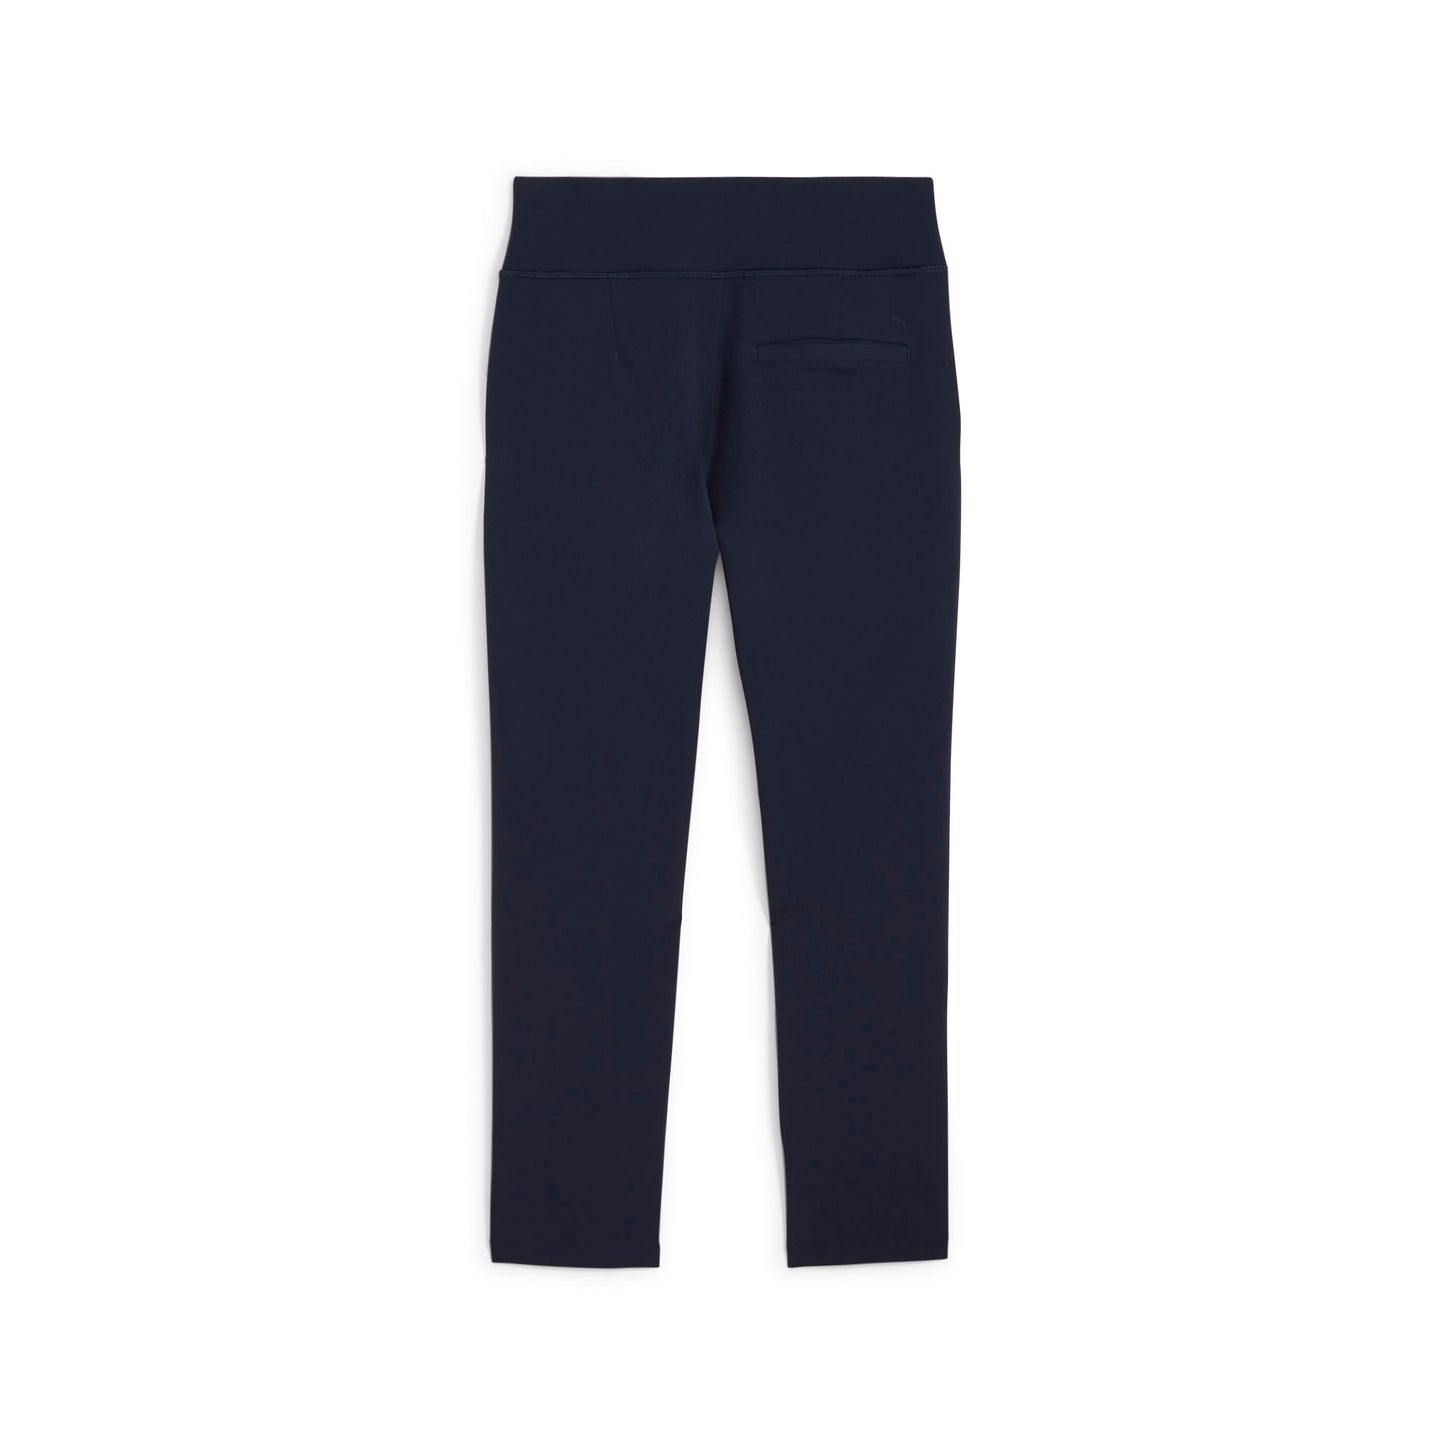 Puma Ladies High Rise 7/8 Trousers in Deep Navy